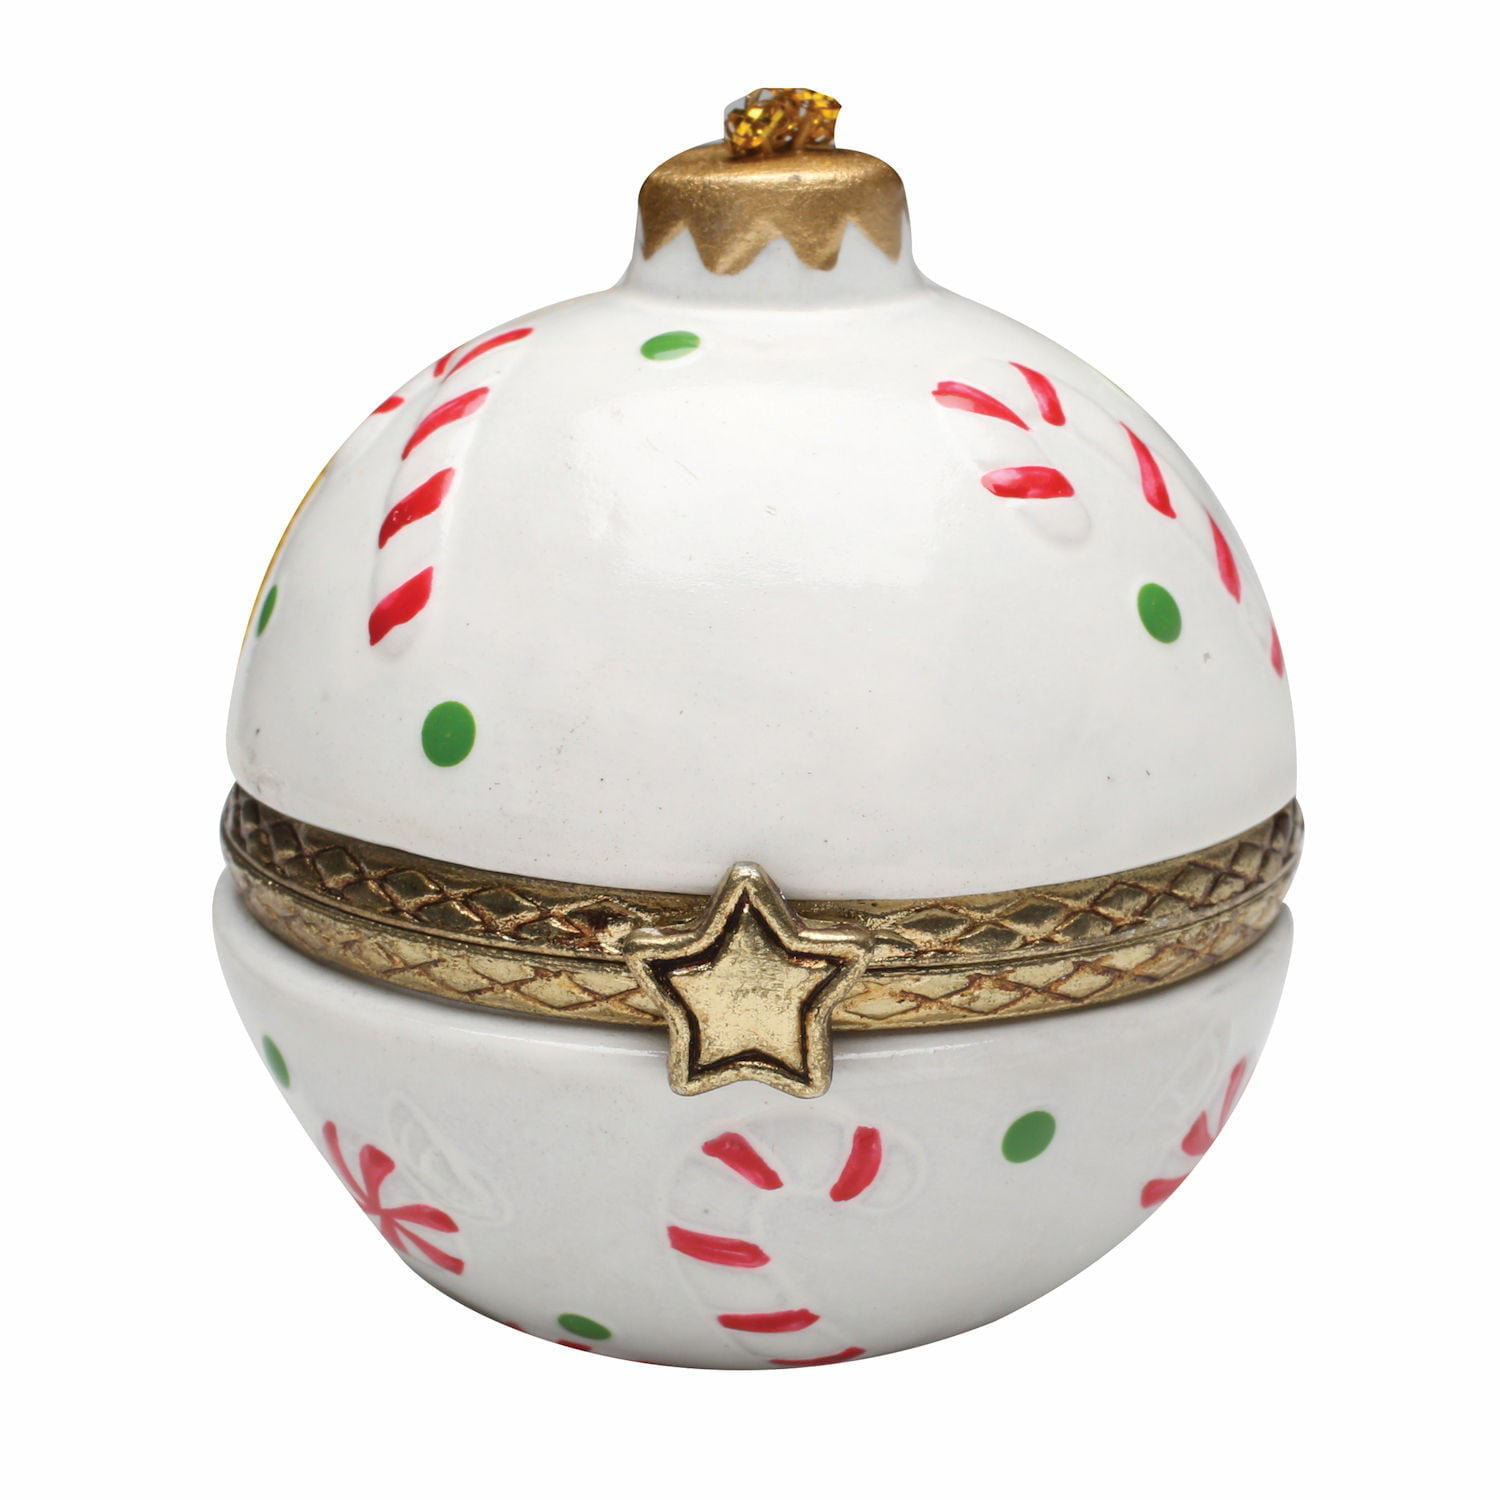 Hinged Porcelain Surprise Christmas Ornaments Champagne